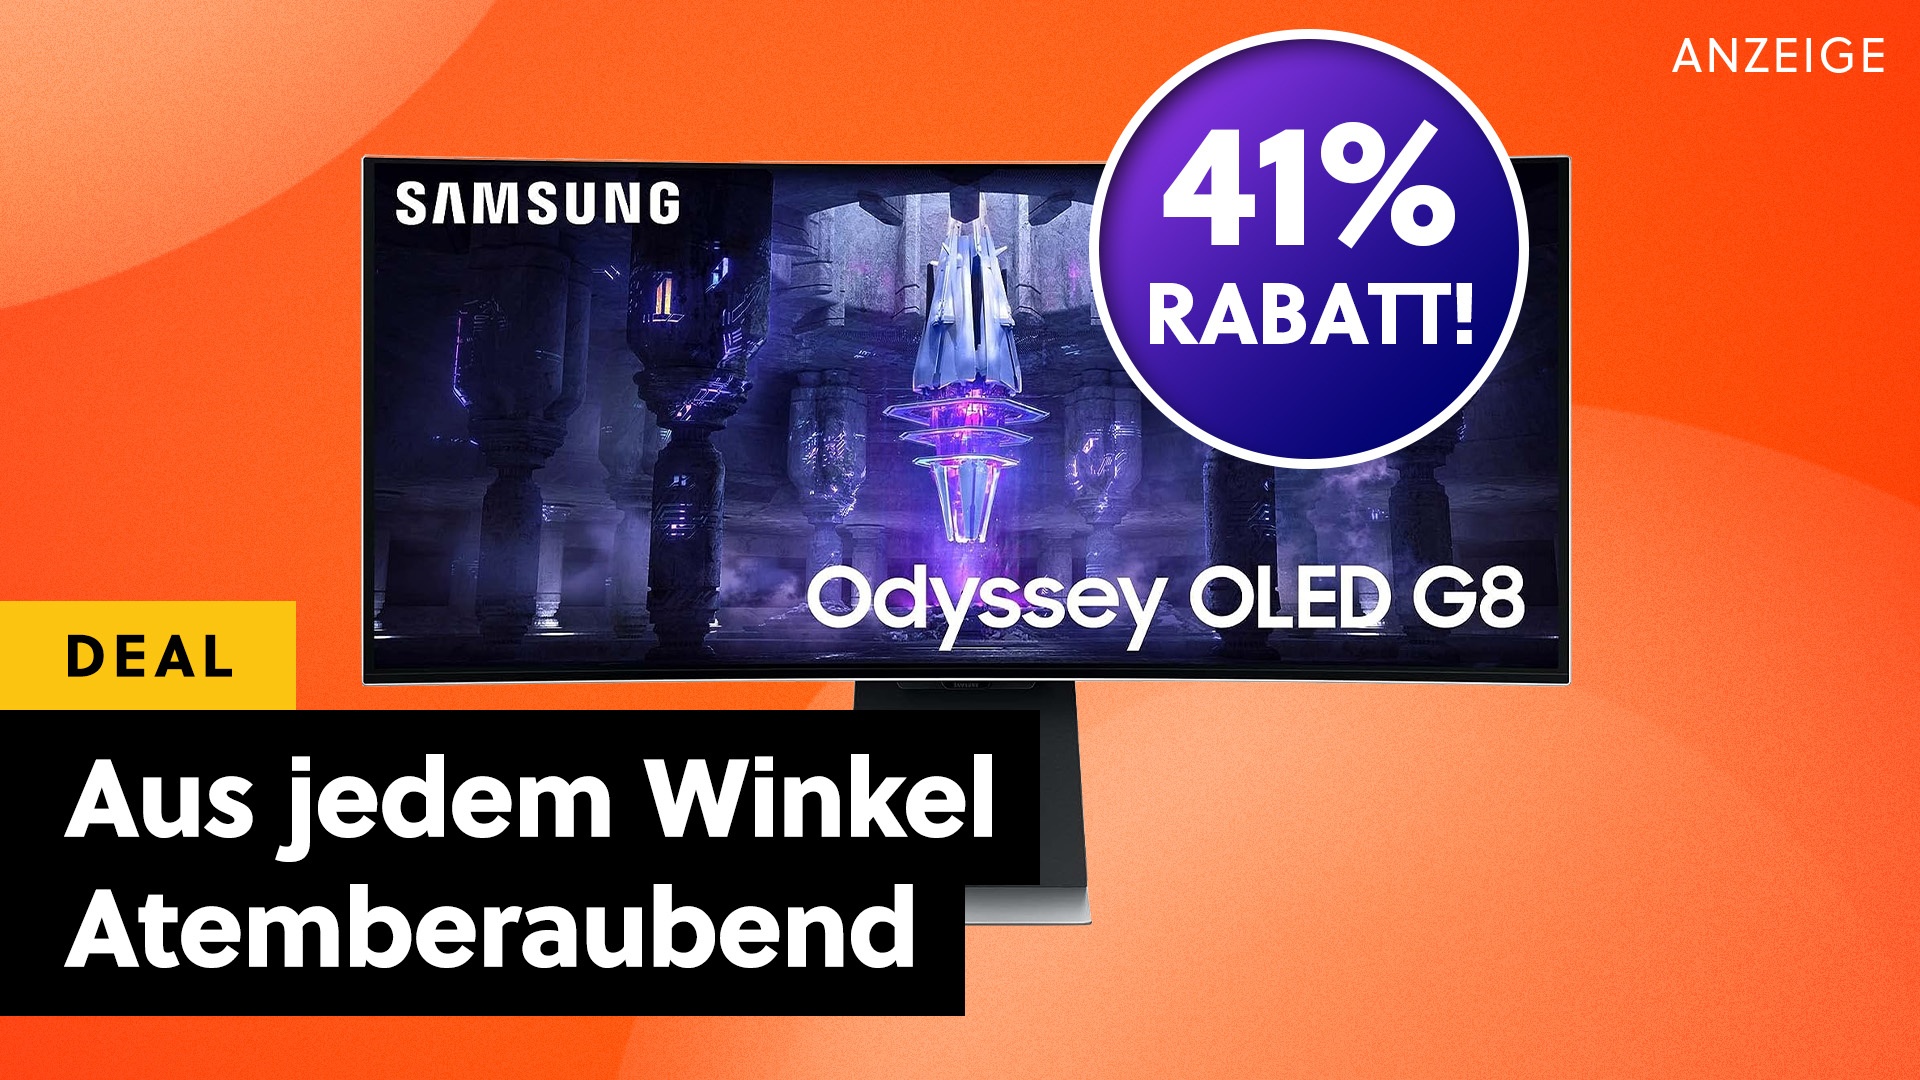 OLED is the future!  Not only does this WQHD gaming monitor from Samsung offer more than 144Hz, but it's also 41% off!